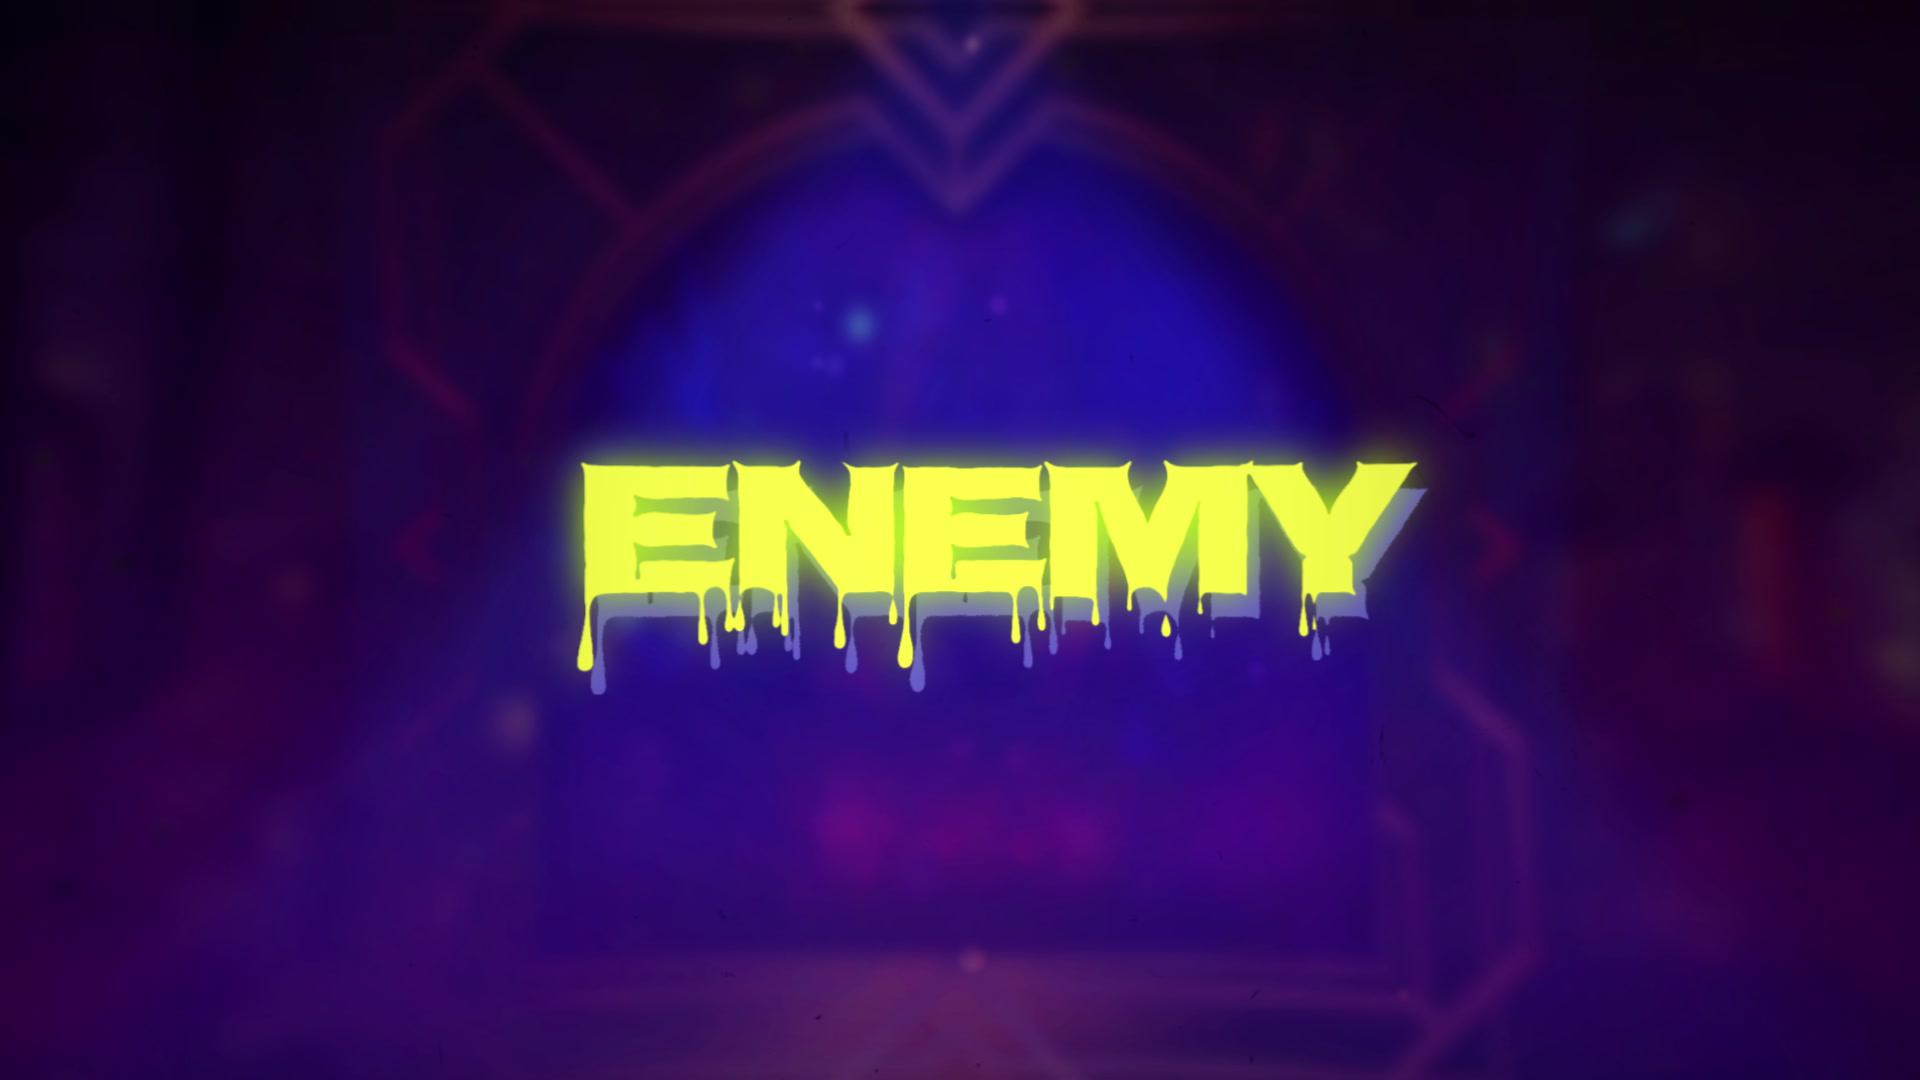 Imagine Dragons - Enemy (from the series Arcane League of Legends/Lyric Video)